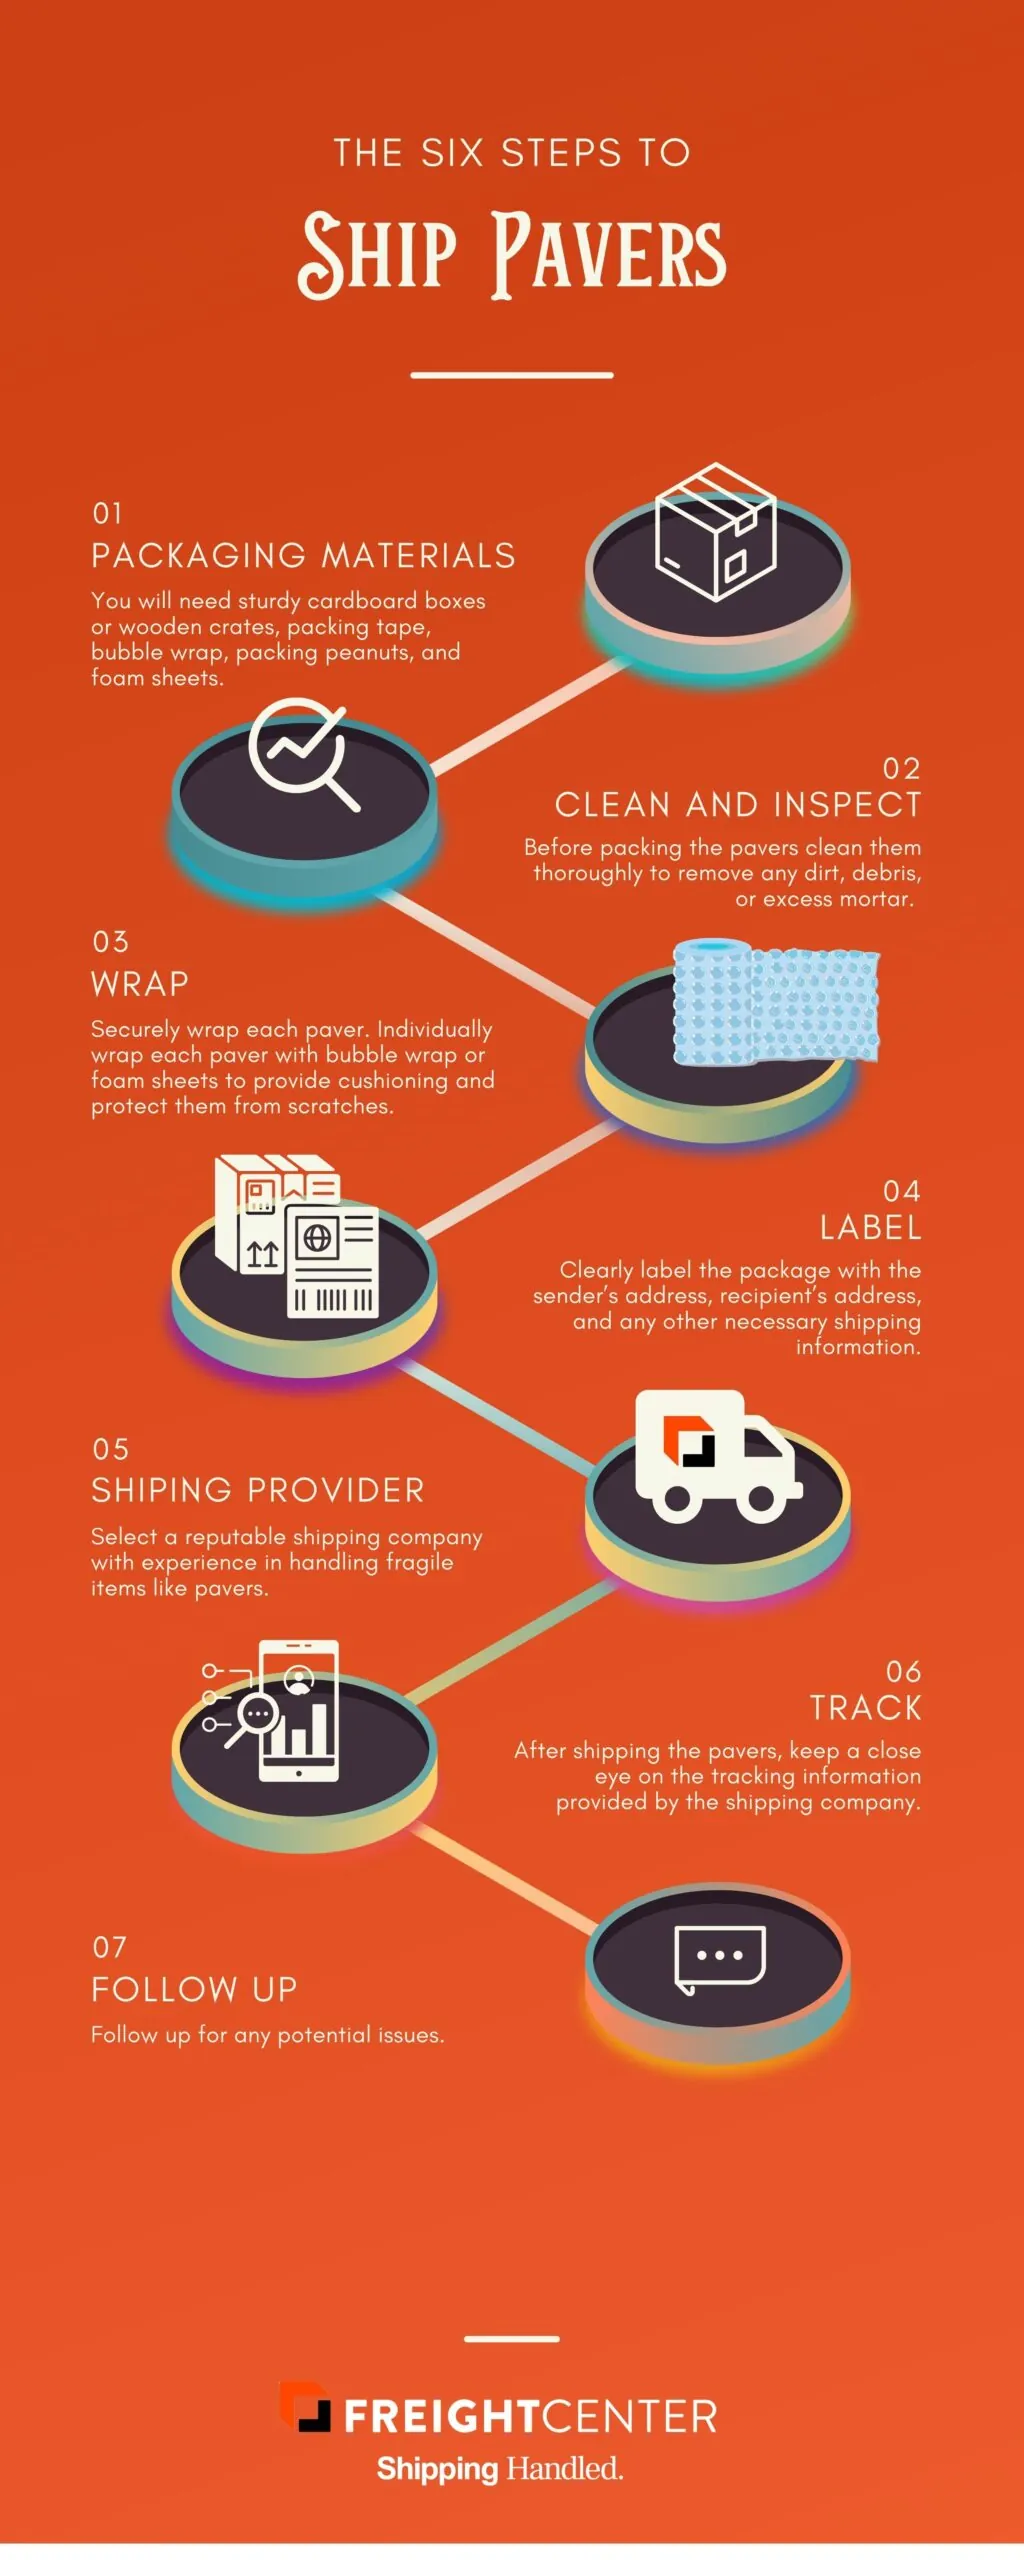 Shipping Pavers 6 steps infographic FreightCenter